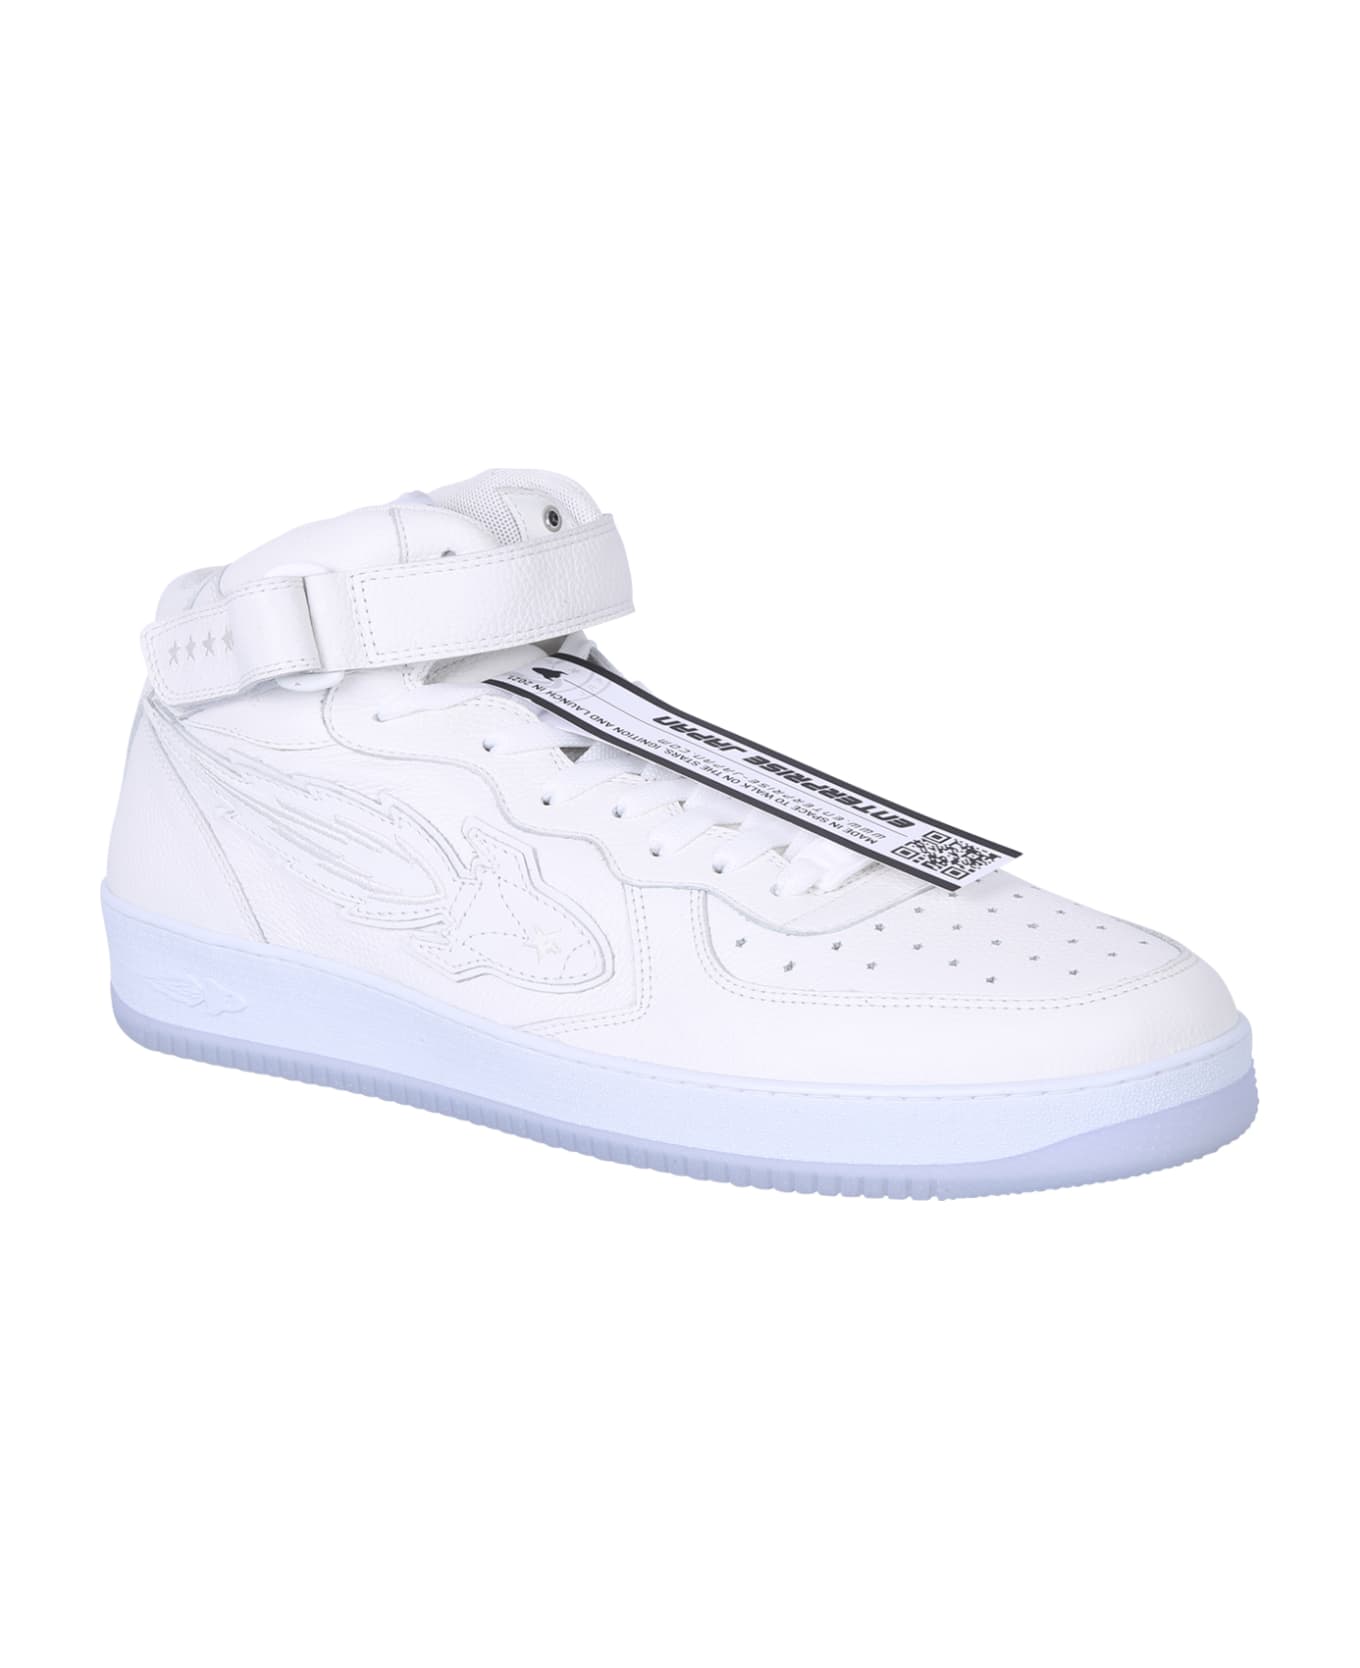 Enterprise Japan Lace Up Sneakers - White スニーカー